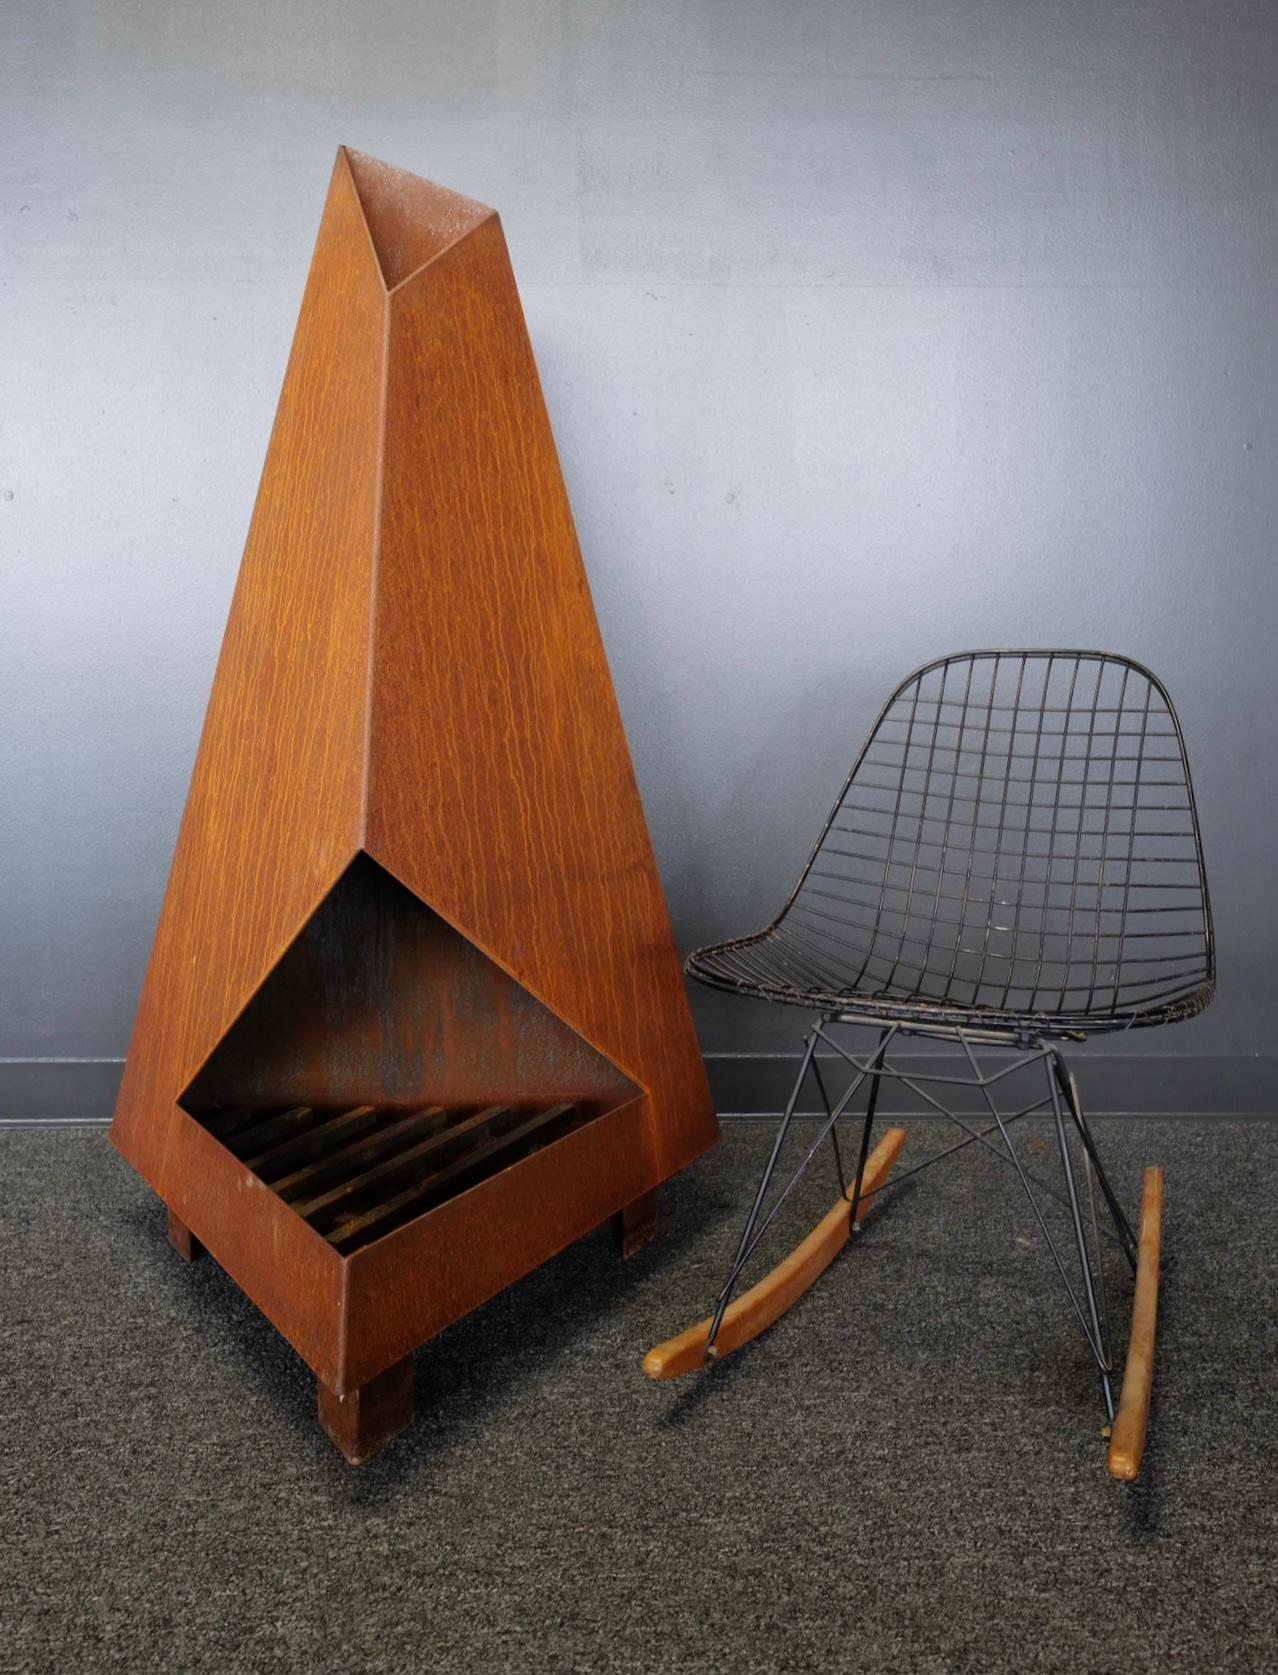 Not your normal chiminea or fireplace.
This high design, raw oxidized steel sculptural piece will make a statement in any outdoor space. Functionally, it is perfect on that cold evening, but also serves as an amazing art display the remainder of the